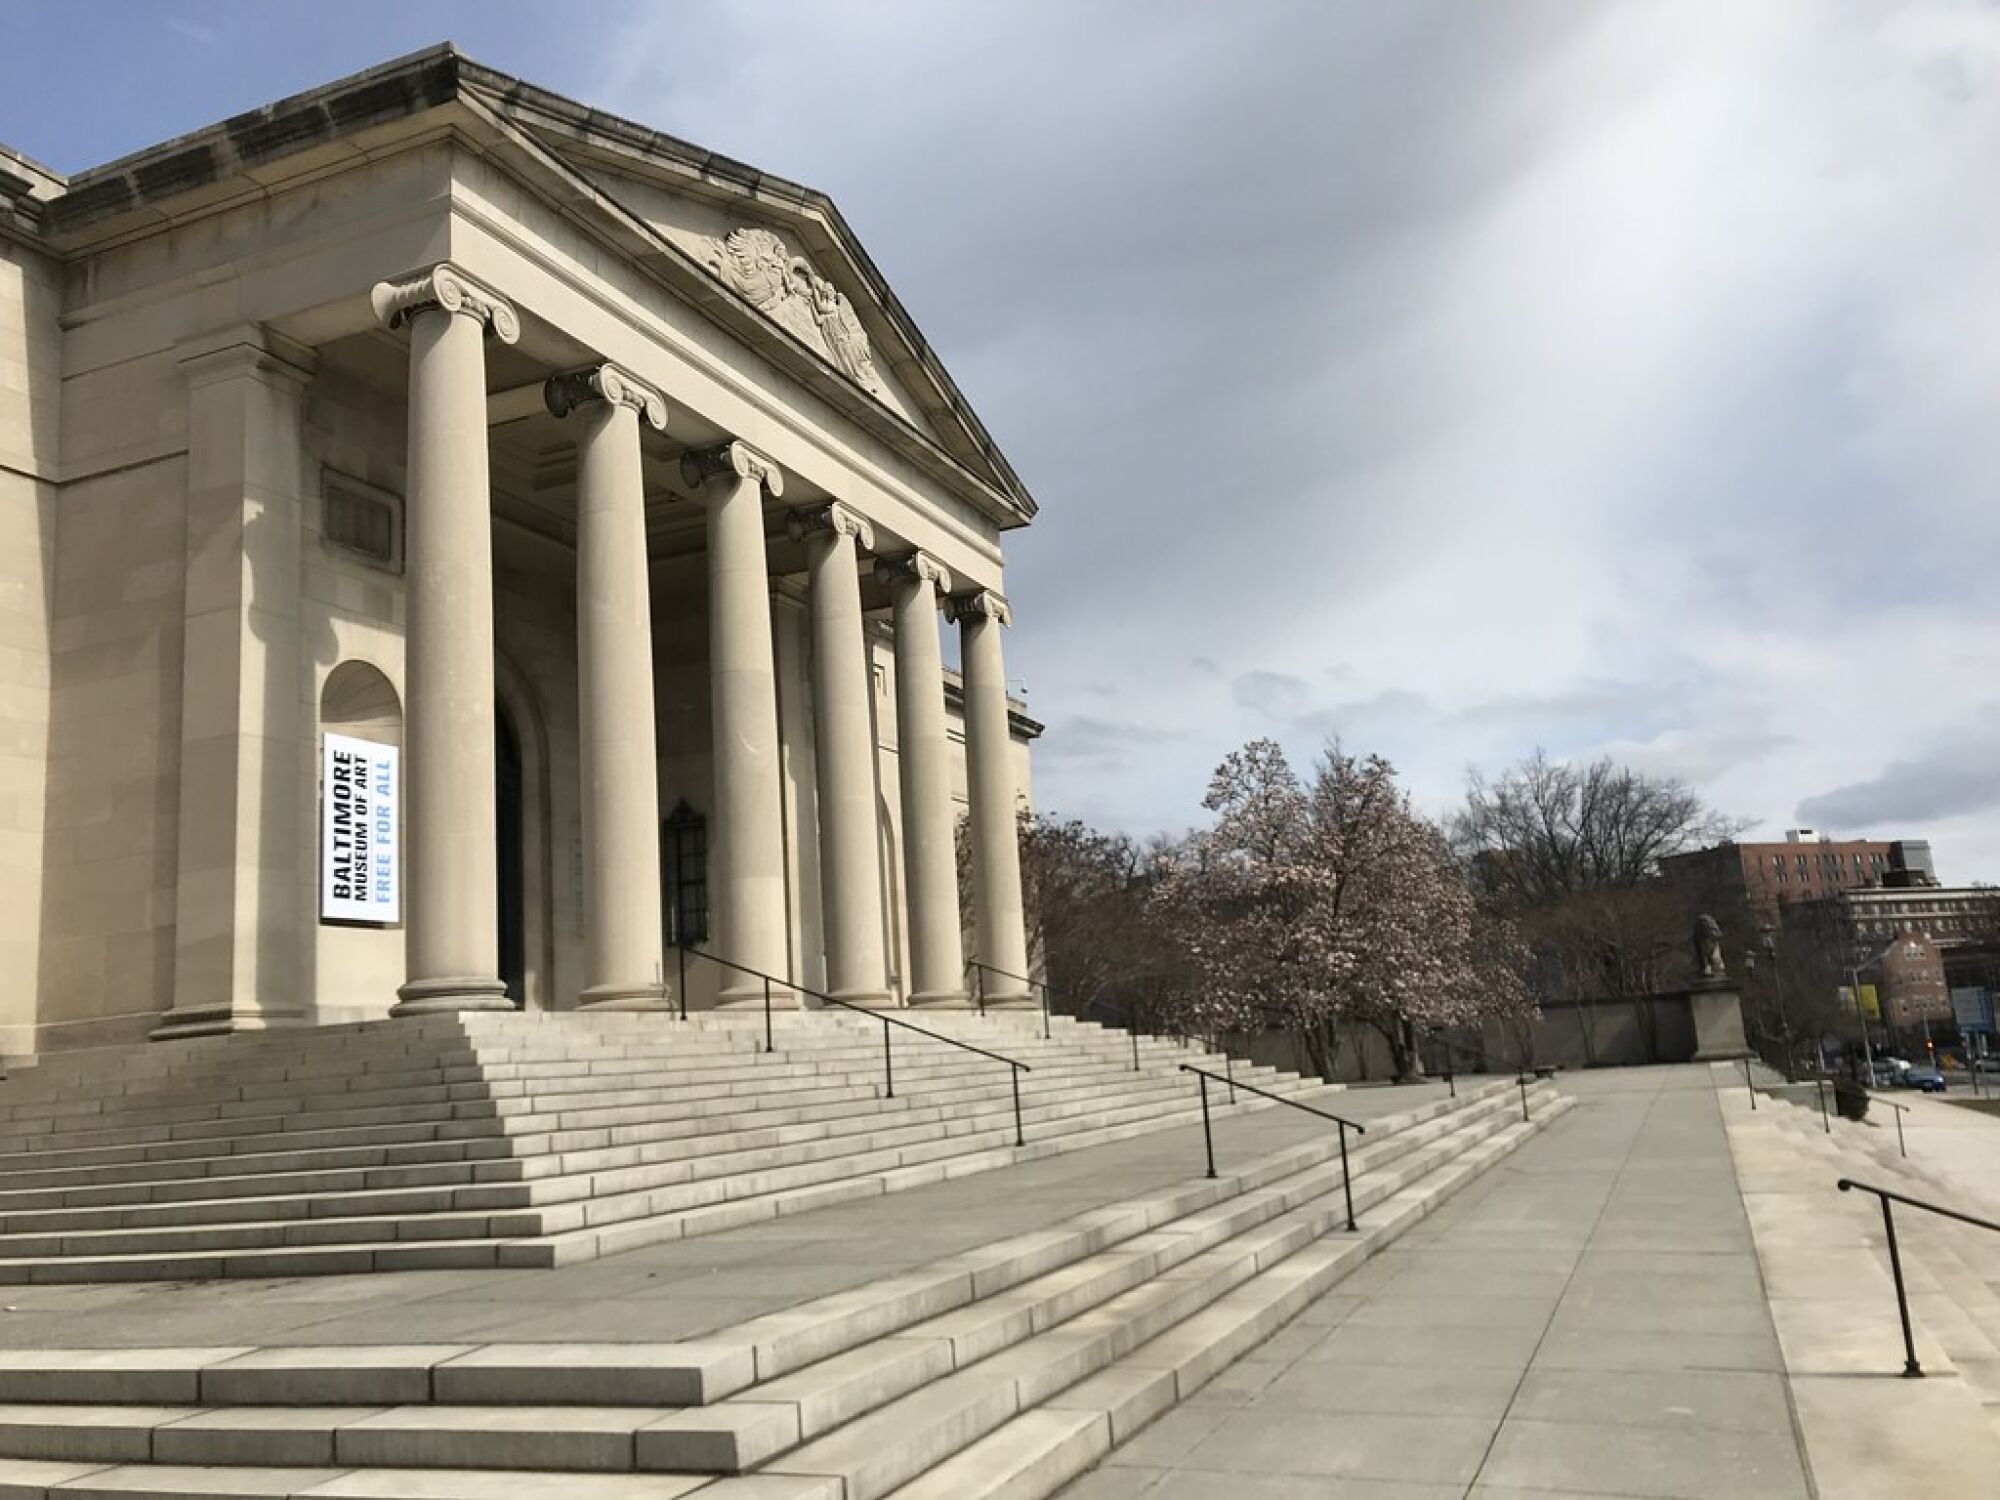 A side view of the front steps and colonnade of the Baltimore Museum of Art